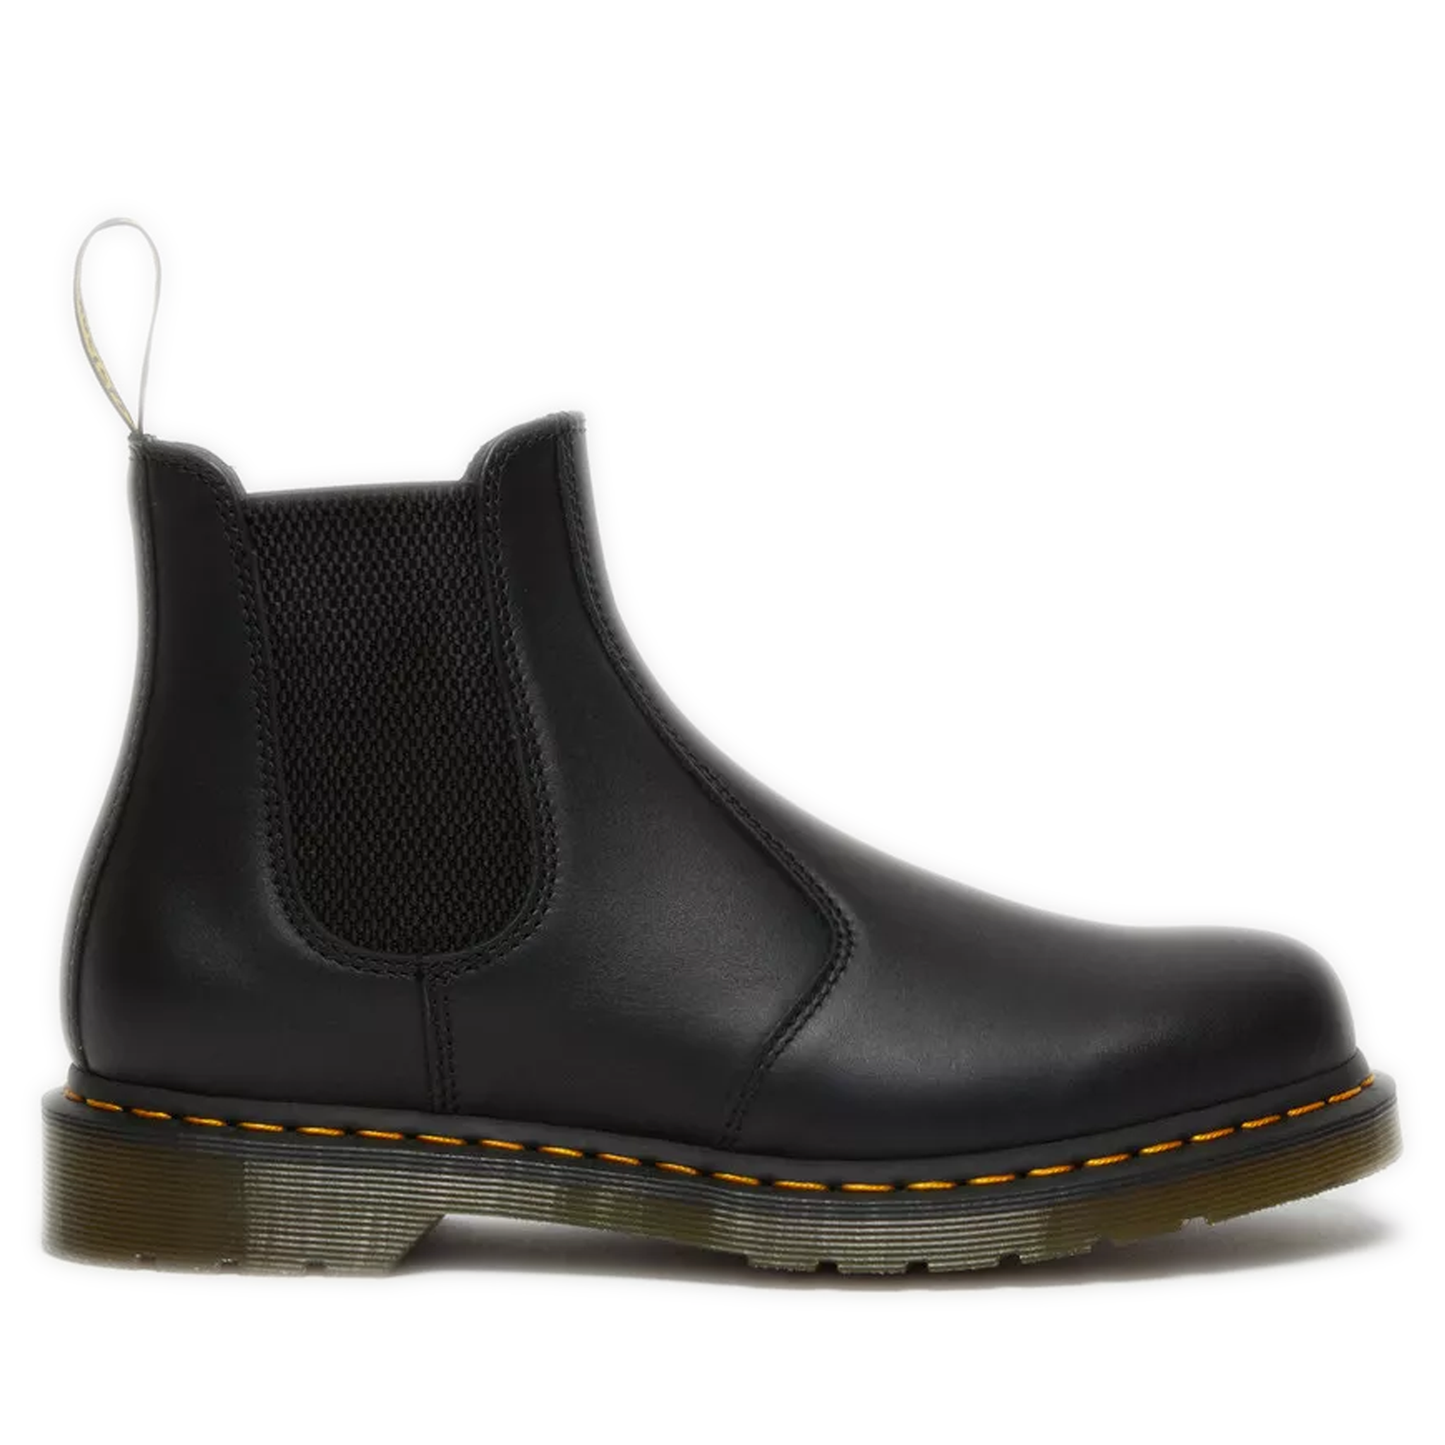 Women's Dr. Martens 2976 Nappa Leather Chelsea Boots - Black Nappa